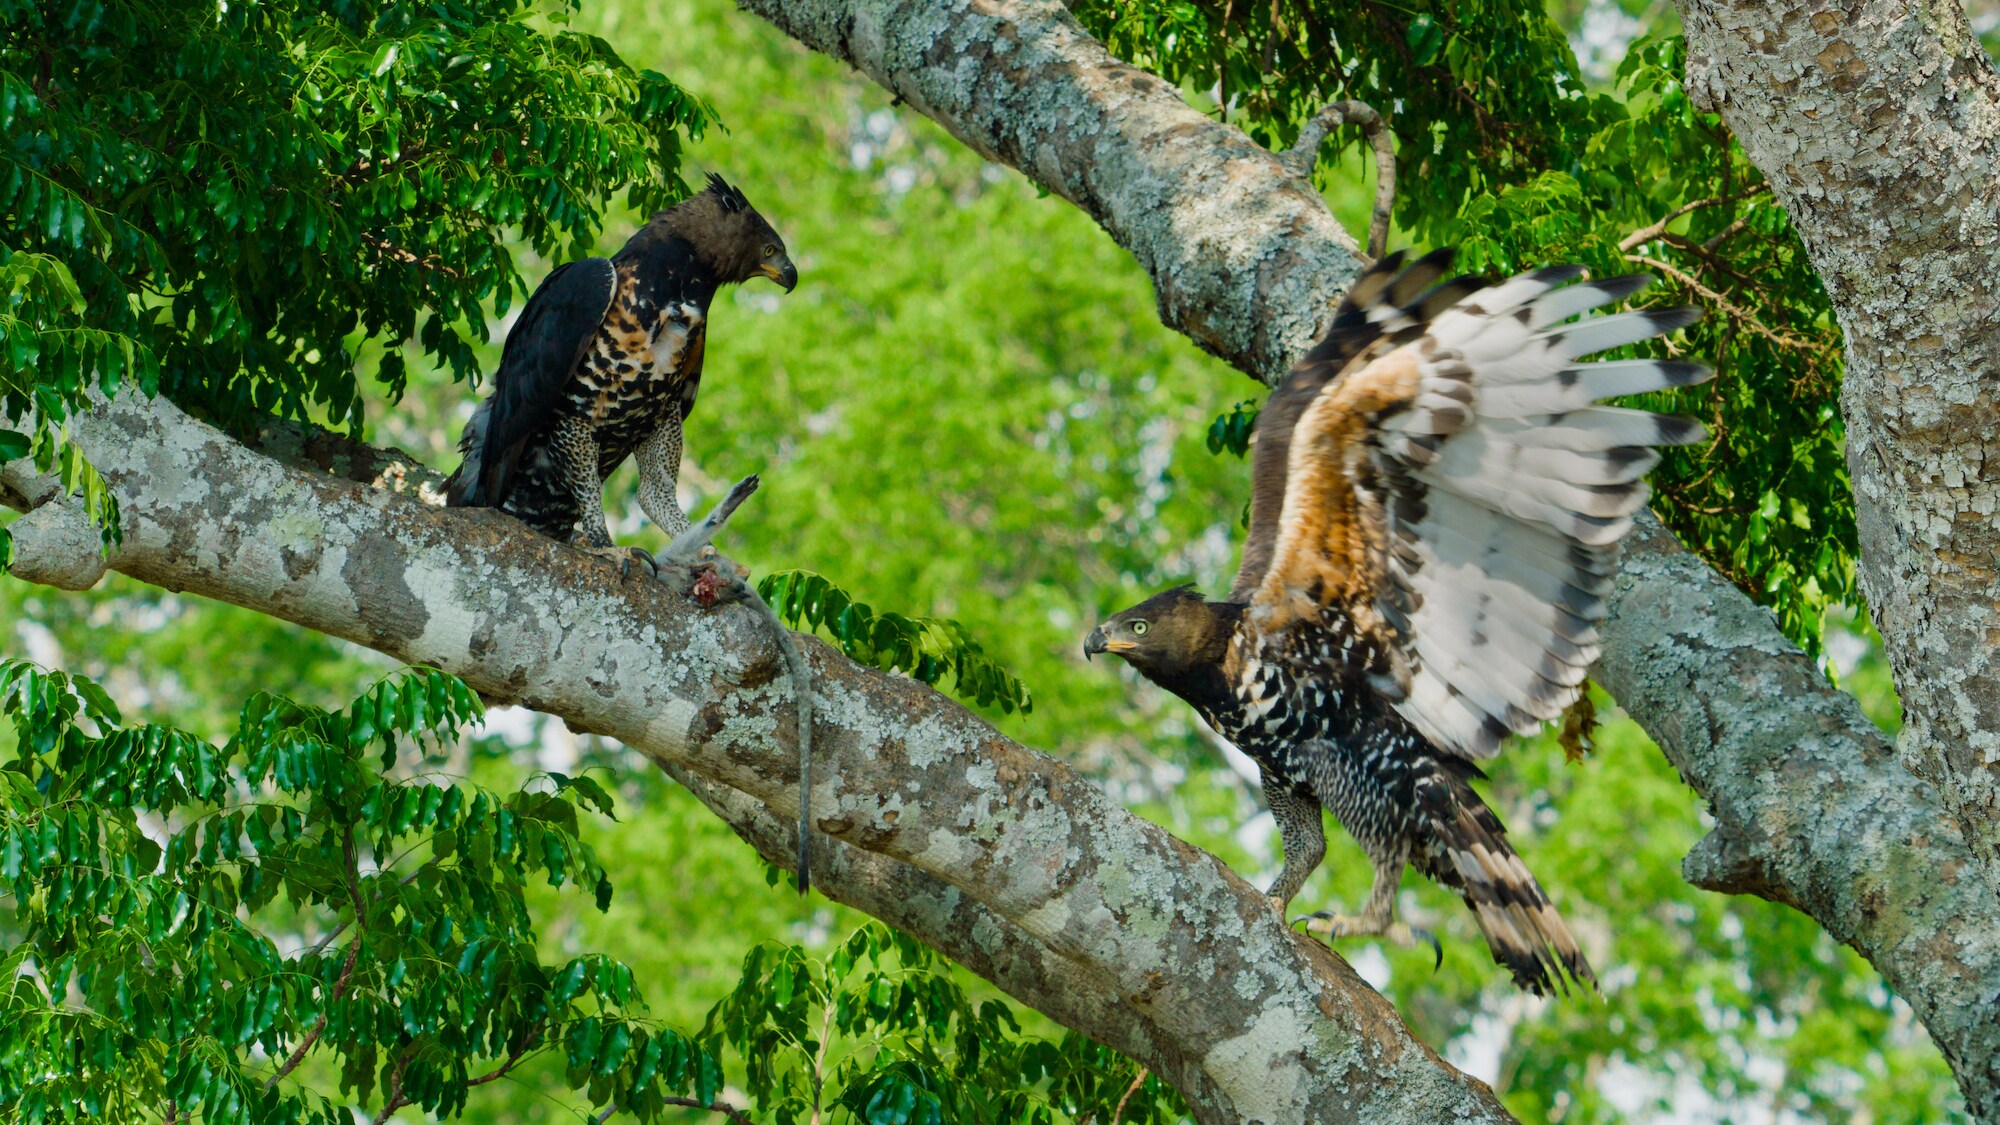 The father crowned eagle comes home with food for the nest, the mother greets him. (Credit: National Geographic/Bertie Gregory for Disney+)